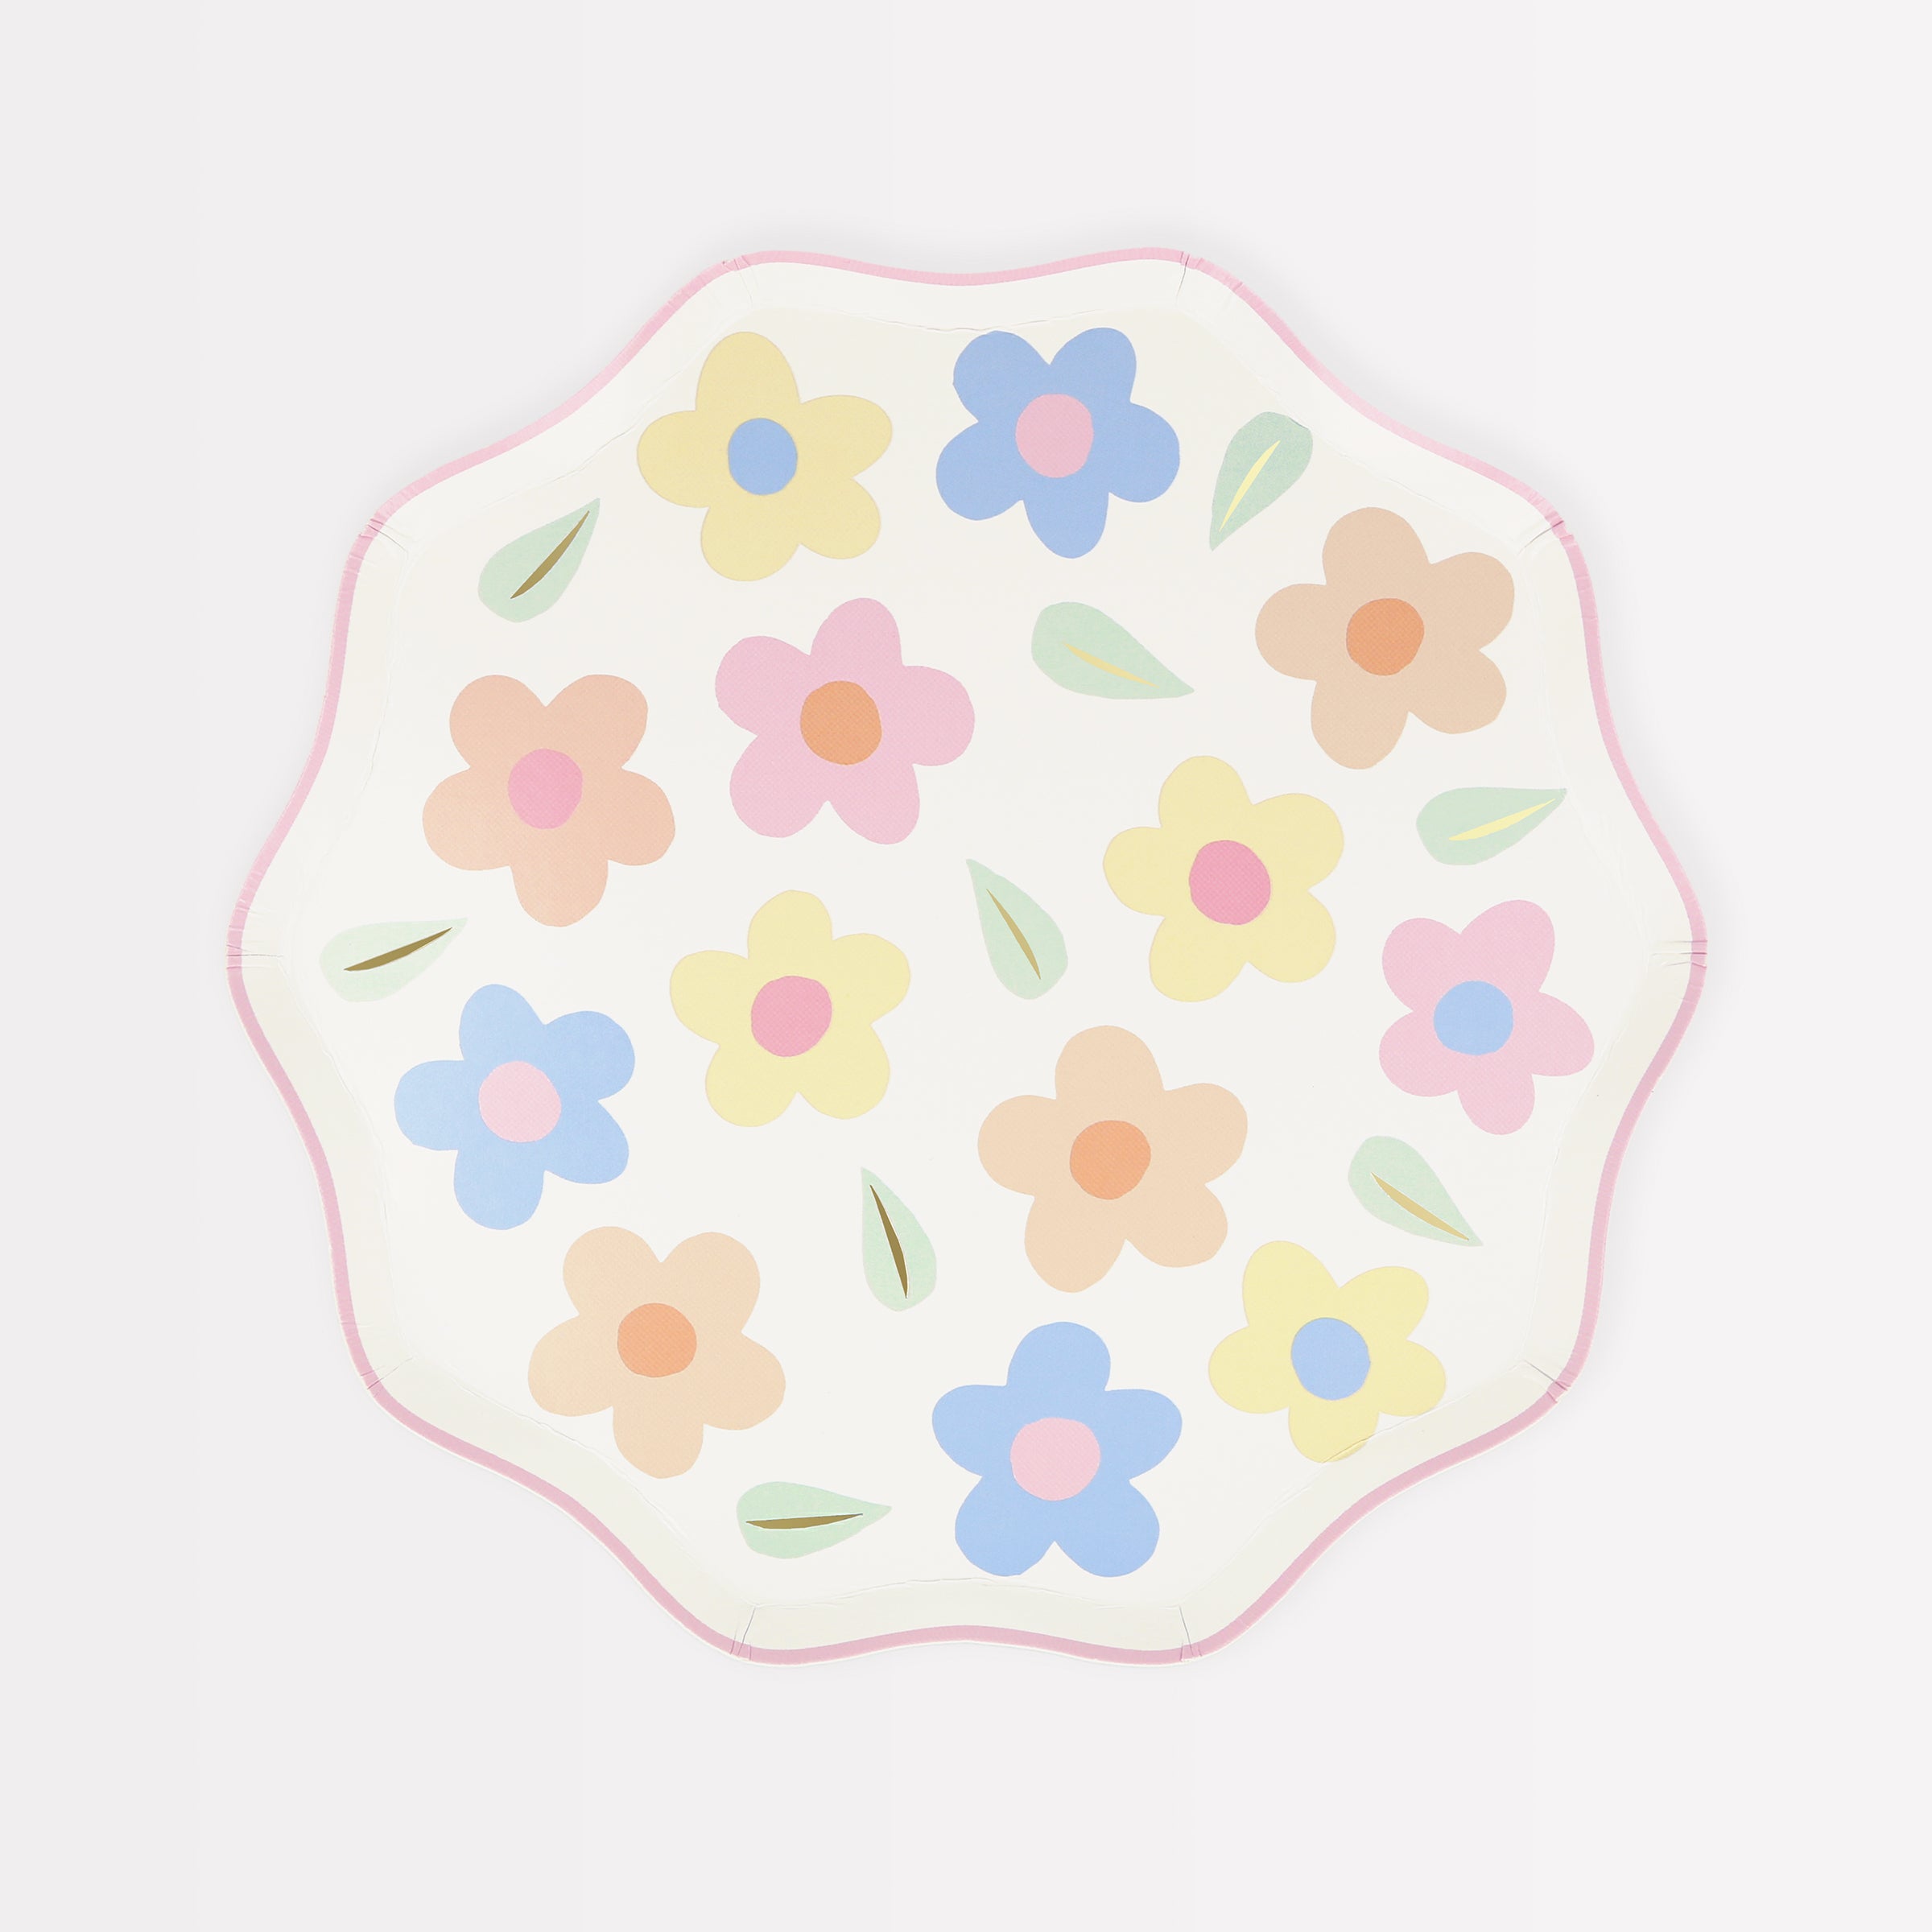 Our paper plates, with floral designs, have pink scalloped borders and shiny gold foil details.